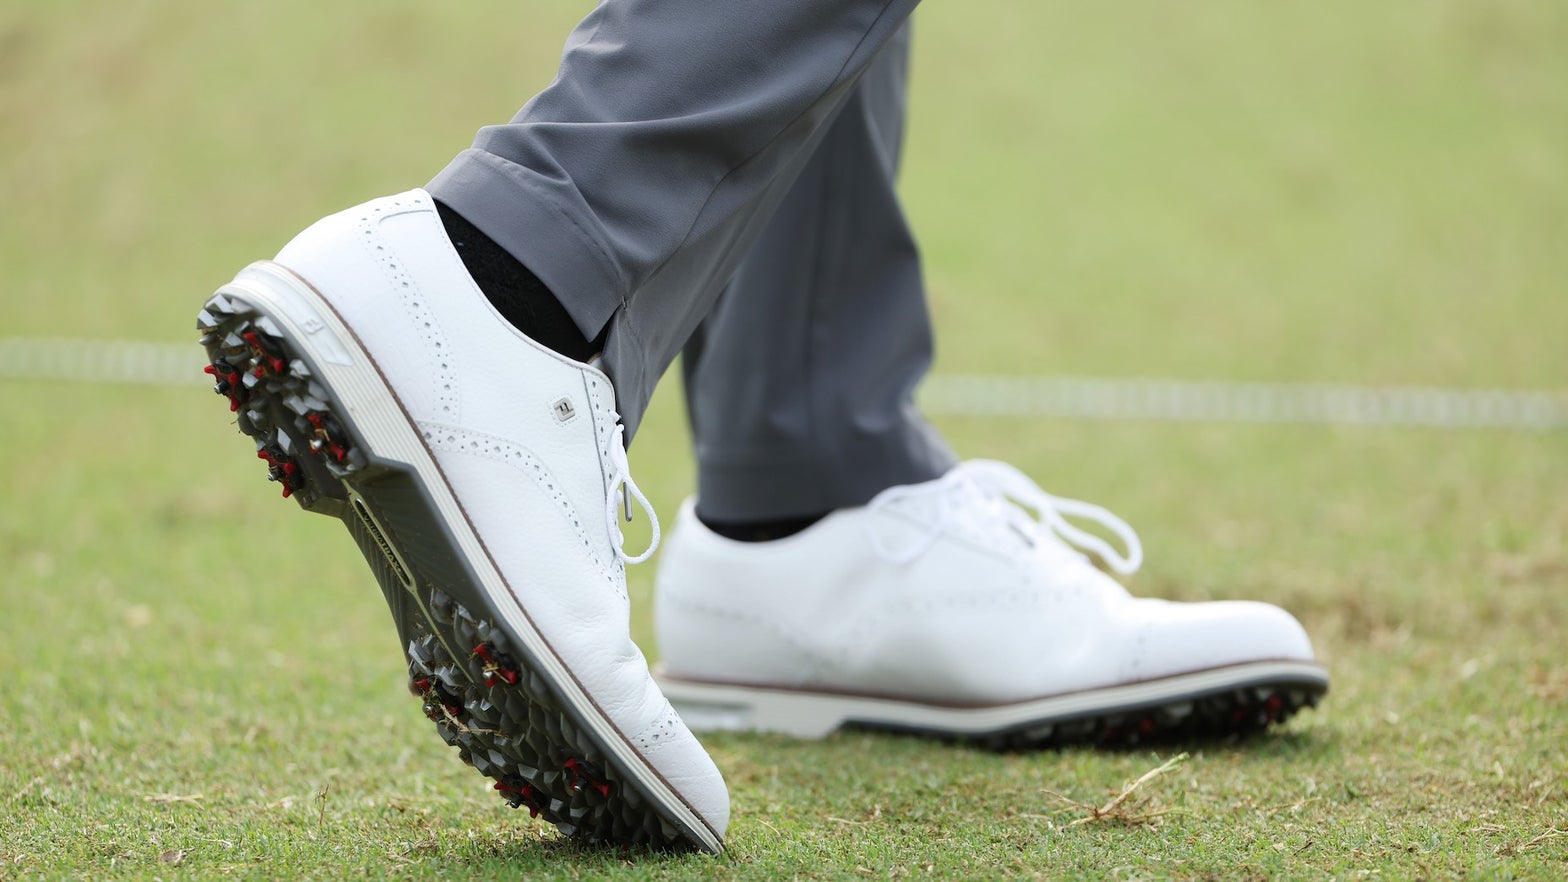 How many tour pros still wear metal spikes? | Fully Equipped Mailbag ...